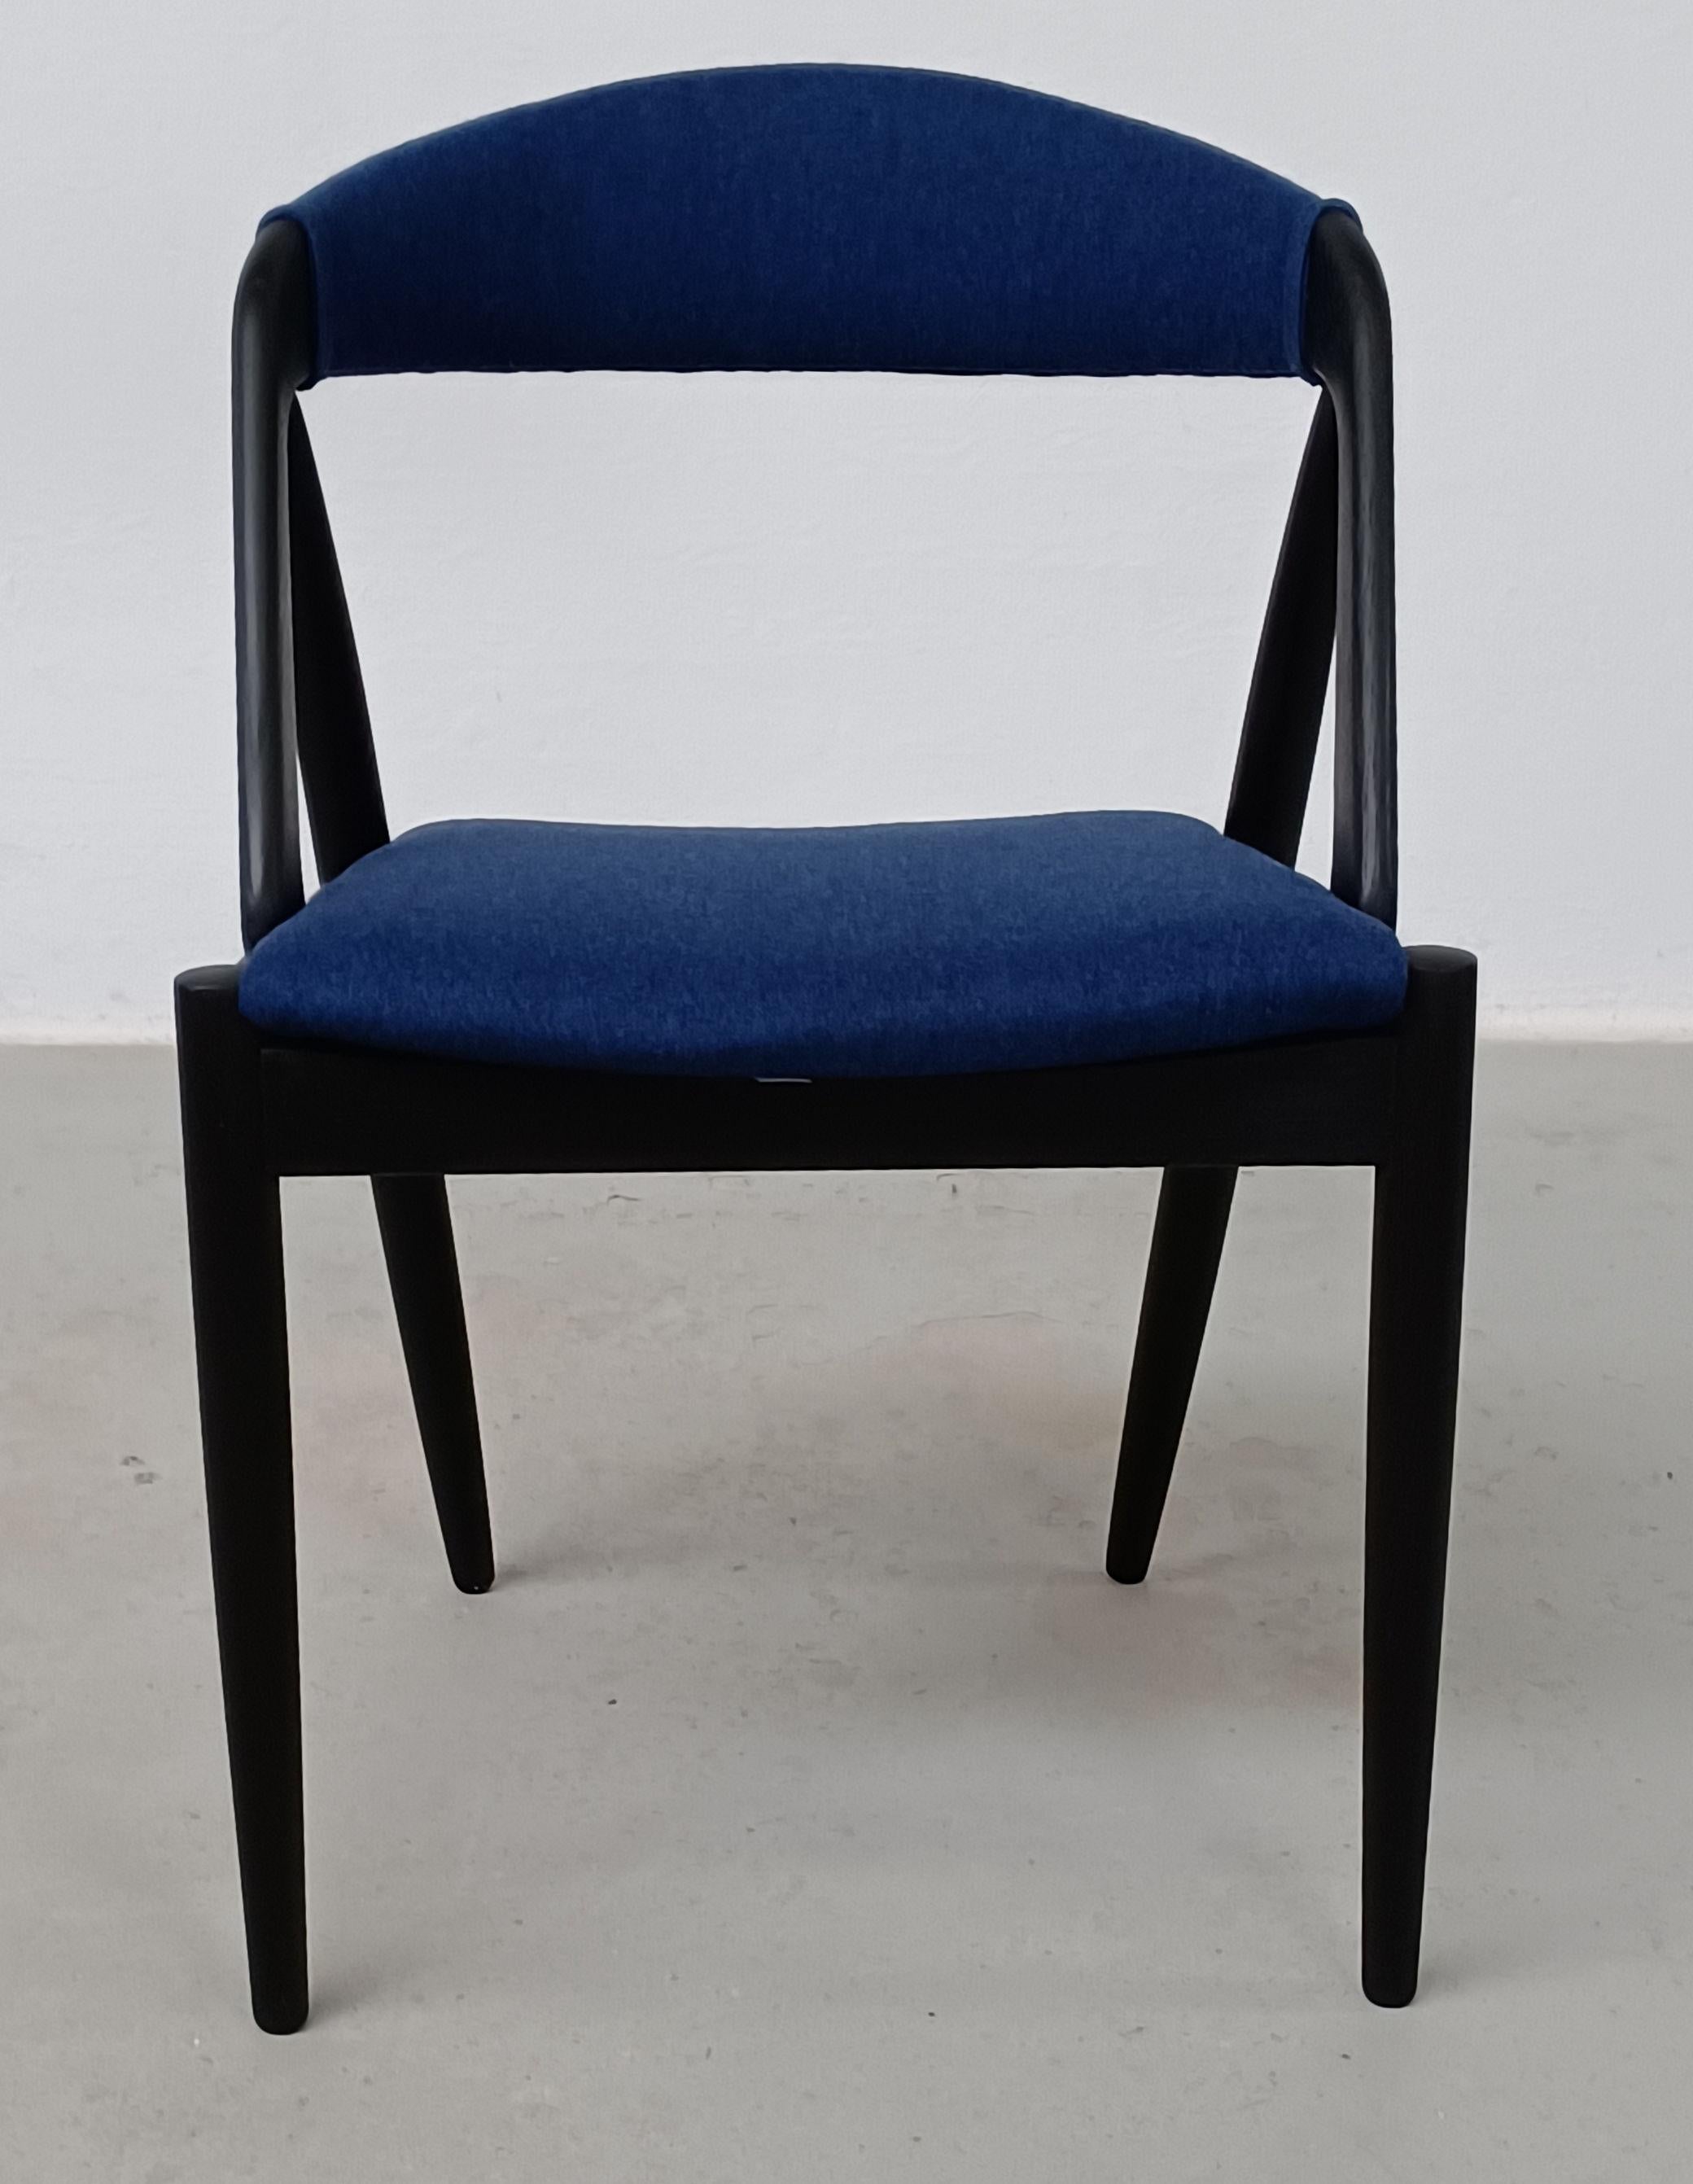 Set of four fully restored ebonized and reupholstered Kai Kristiansen Oak Dining Chairs

The A-frame model 31 dining chairs were designed by Kai Kristiansen in 1956 for Schou-Andersens Møbelfabrik and the A-frame chair is one of the most well-known